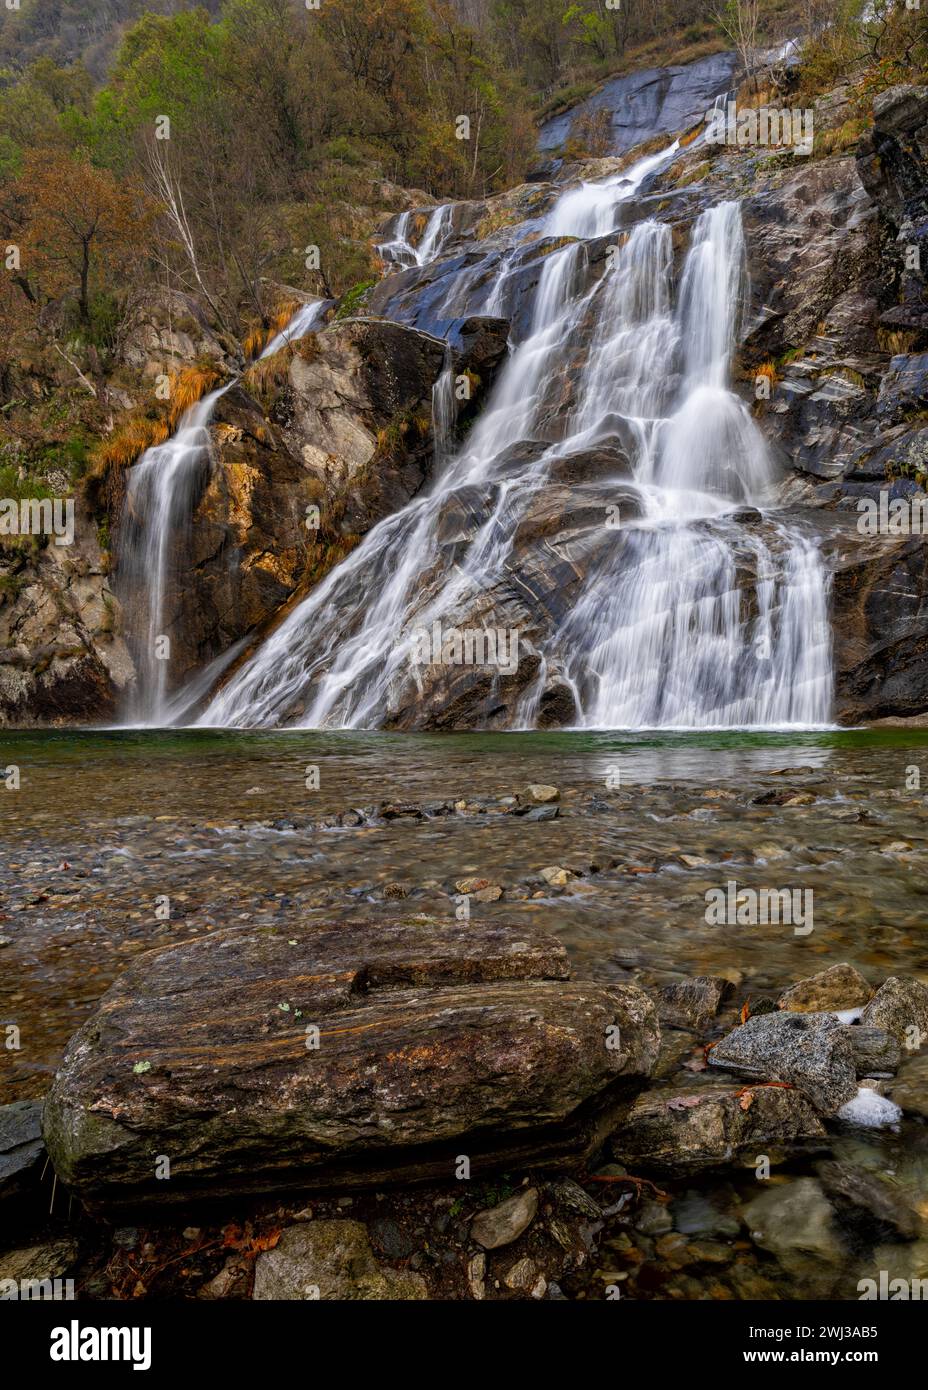 Vertical view of the Cascata delle Sponde waterfall near Someo in the Ticino in Switzerland Stock Photo